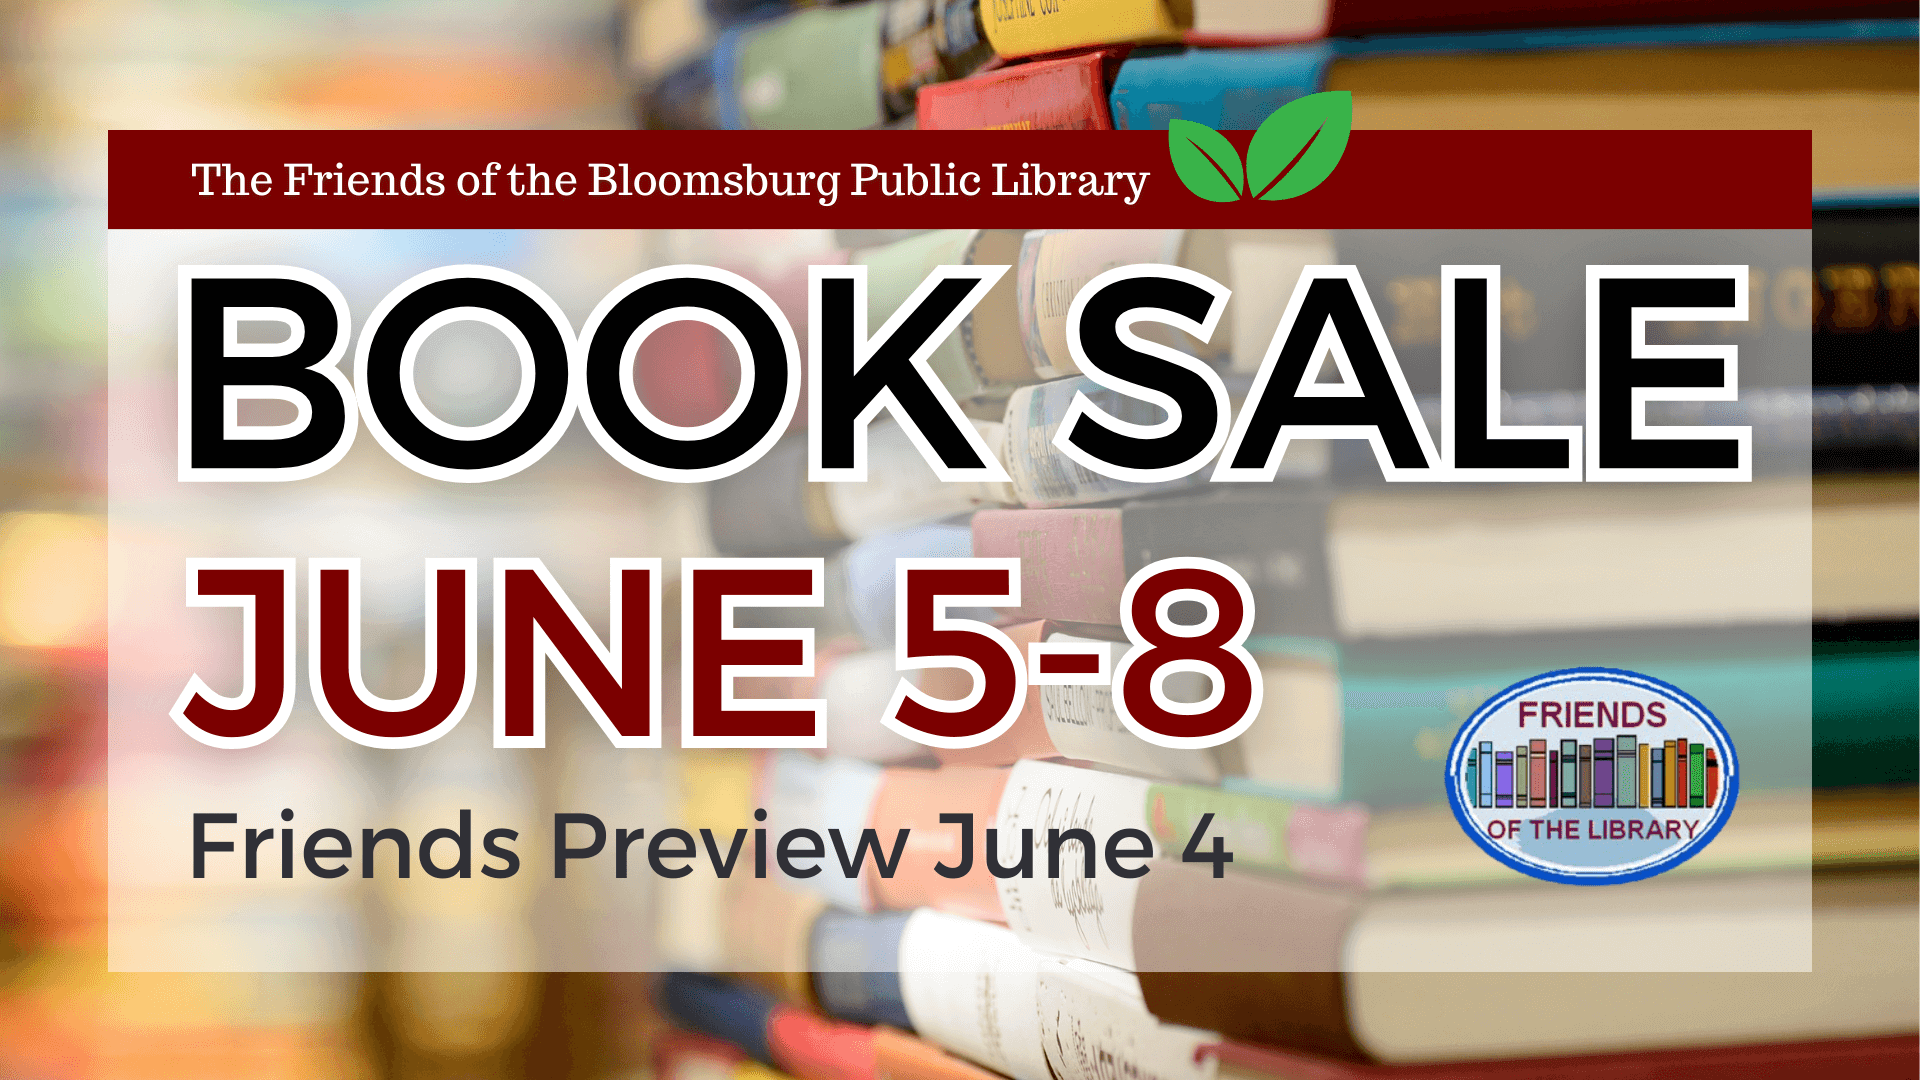 Picture of stacks of books with text Book Sale June 5-8 Friends Preview June 4